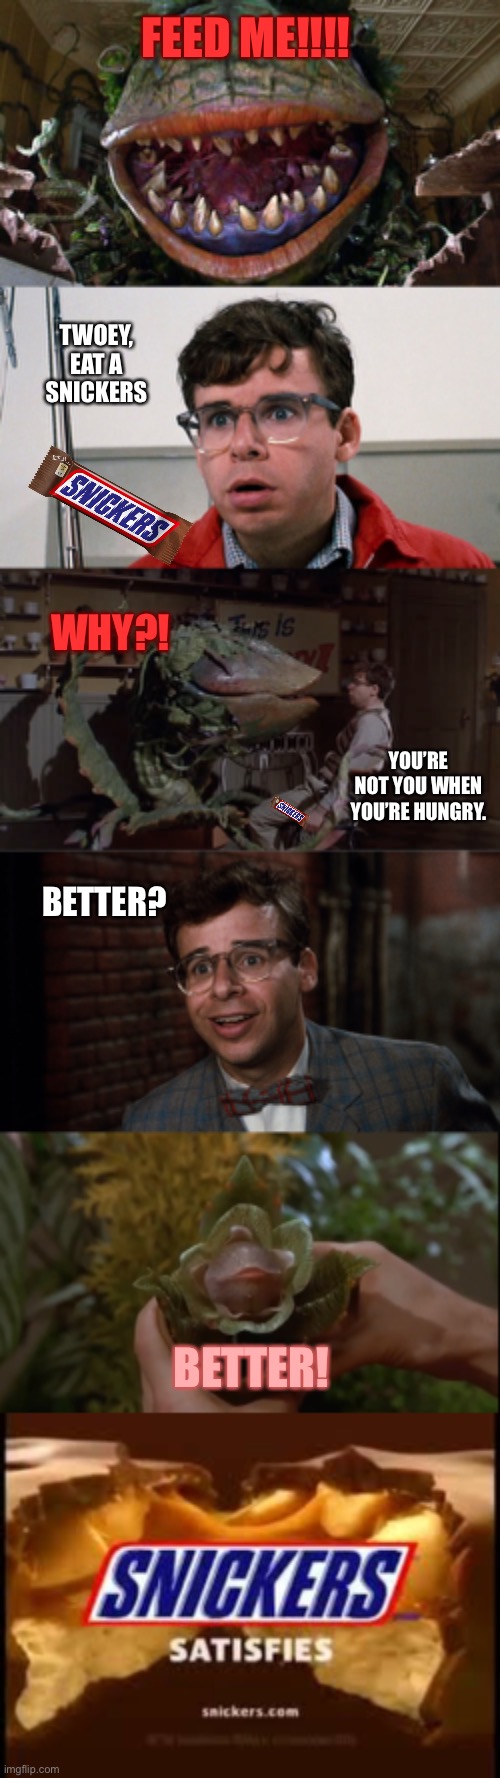 A LSOH meme YEARS in the making | FEED ME!!!! TWOEY, EAT A SNICKERS; WHY?! YOU’RE NOT YOU WHEN YOU’RE HUNGRY. BETTER? BETTER! | image tagged in little shop of horrors,audrey 2,audrey ii,seymour krelborn,lsoh,musicals | made w/ Imgflip meme maker